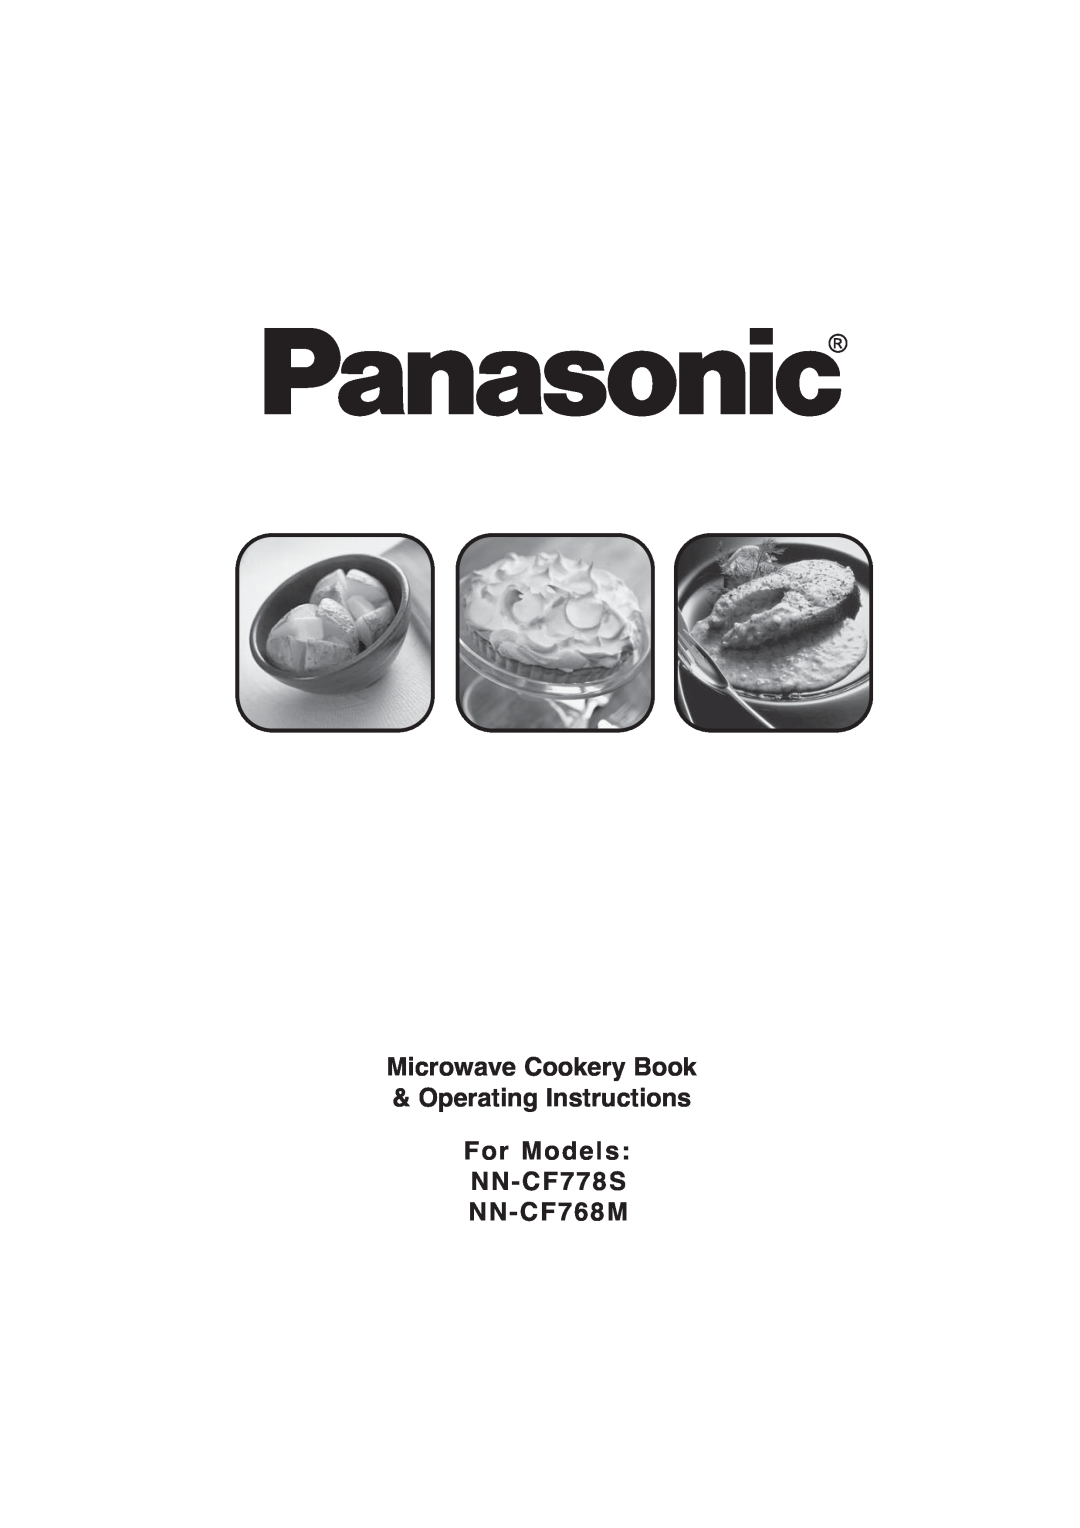 Panasonic operating instructions For Models NN-CF778S NN-CF768M, Microwave Cookery Book & Operating Instructions 